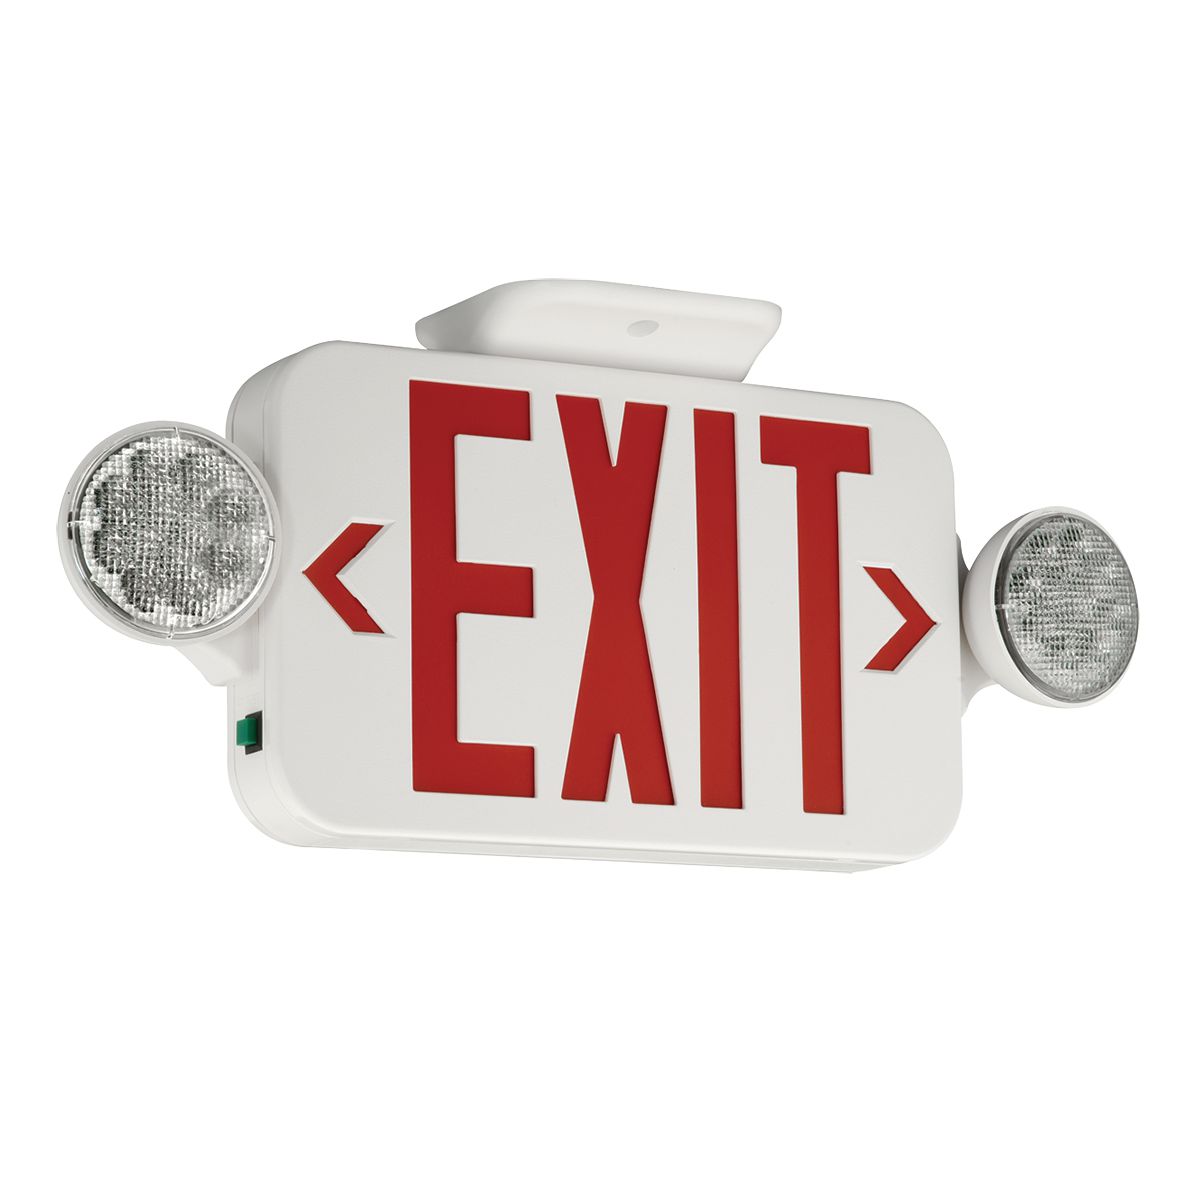 The Compass combination exit sign/emergency light offers quality and value with a compact and attractive LED based emergency exit sign with red letters and 2 fully adjustable LED lamp-heads. The white housing and lamp-heads are made of high impact, UL flame rated thermoplastic. Snap together canopy, housing and removable chevrons for quick and easy installation. The CCRRC has remote capacity to run up to 2 indoor or outdoor remote lamps. See the Compass CIRS or CIRD indoor matching remote, or CORS or CORD outdoor matching remote. Application in stair-wells, hallways, offices and other commercial applications.